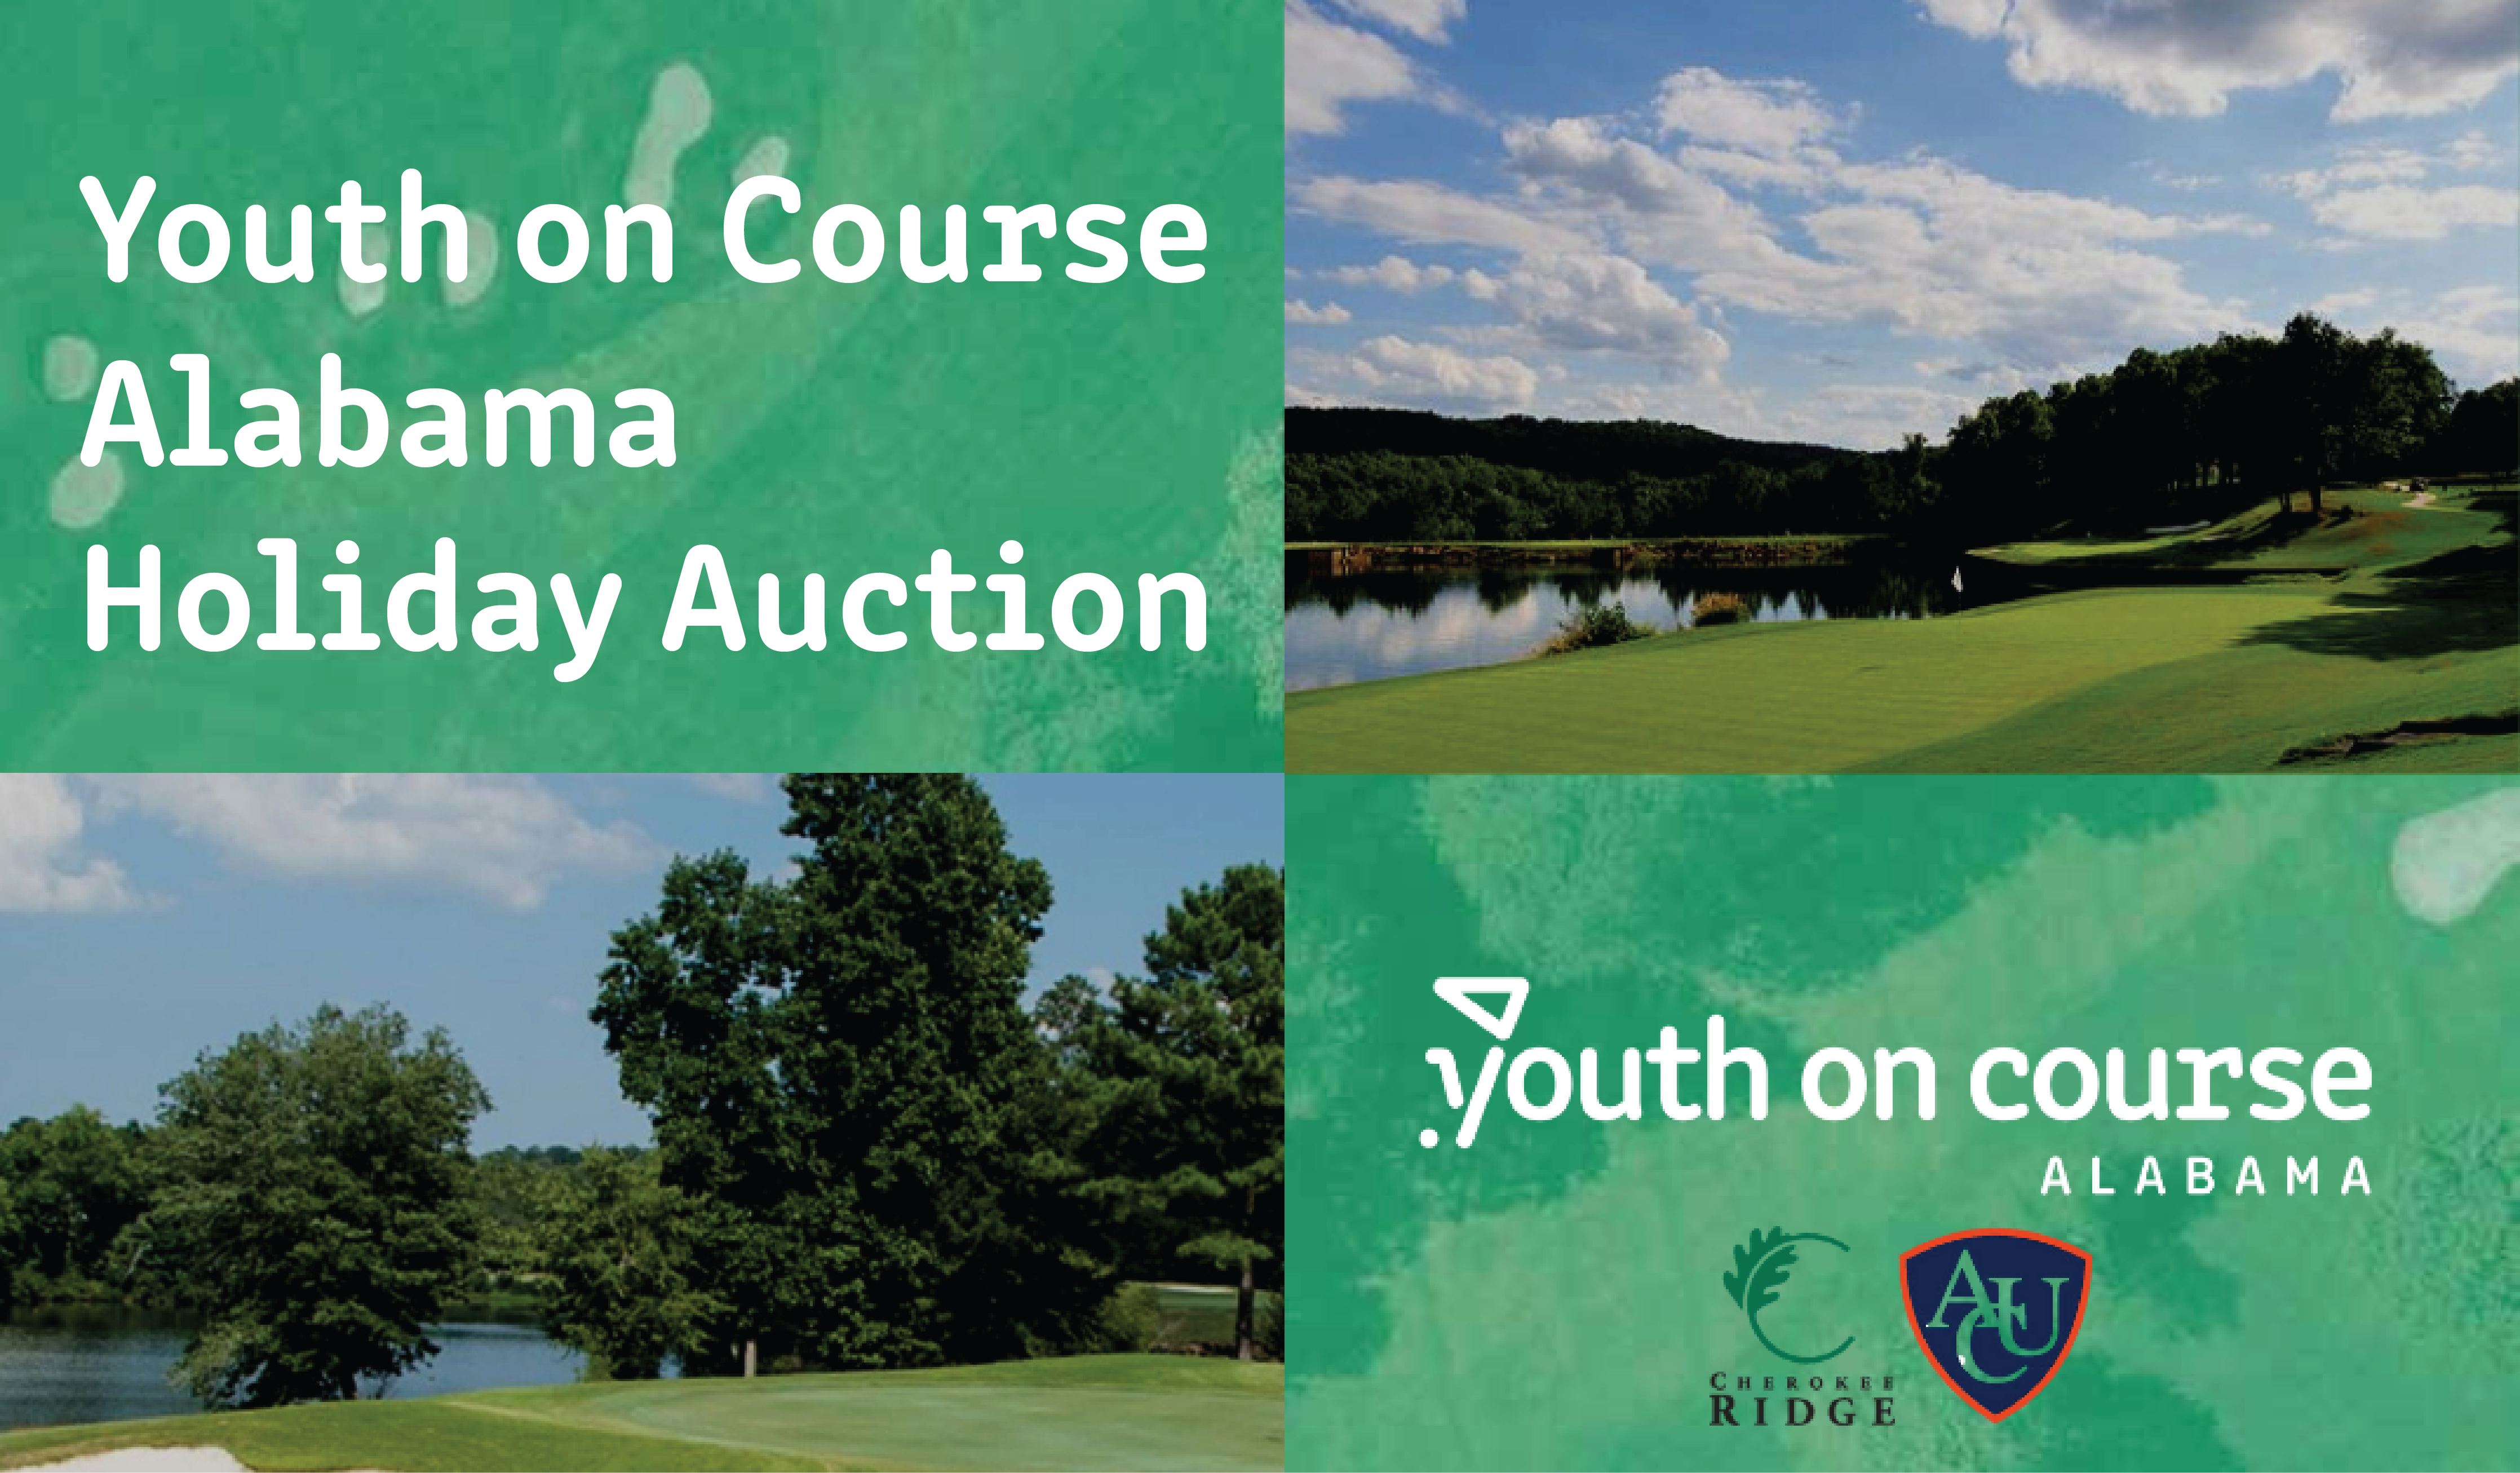 Youth on Course Alabama Holiday Auction